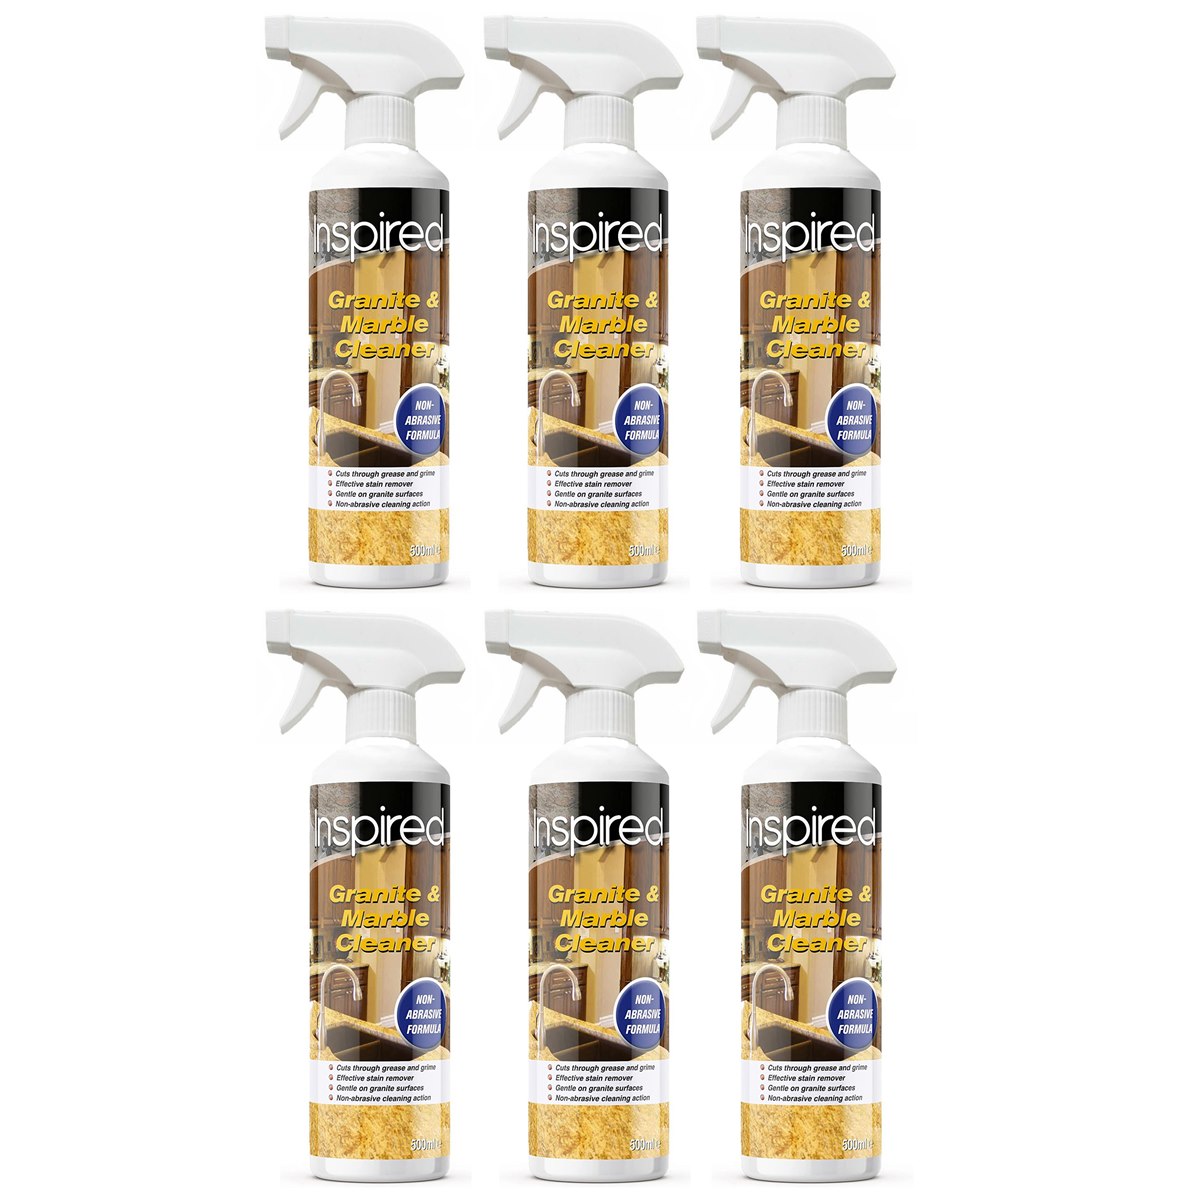 Case of 6 x Inspired Granite And Marble Cleaner Spray 500ml